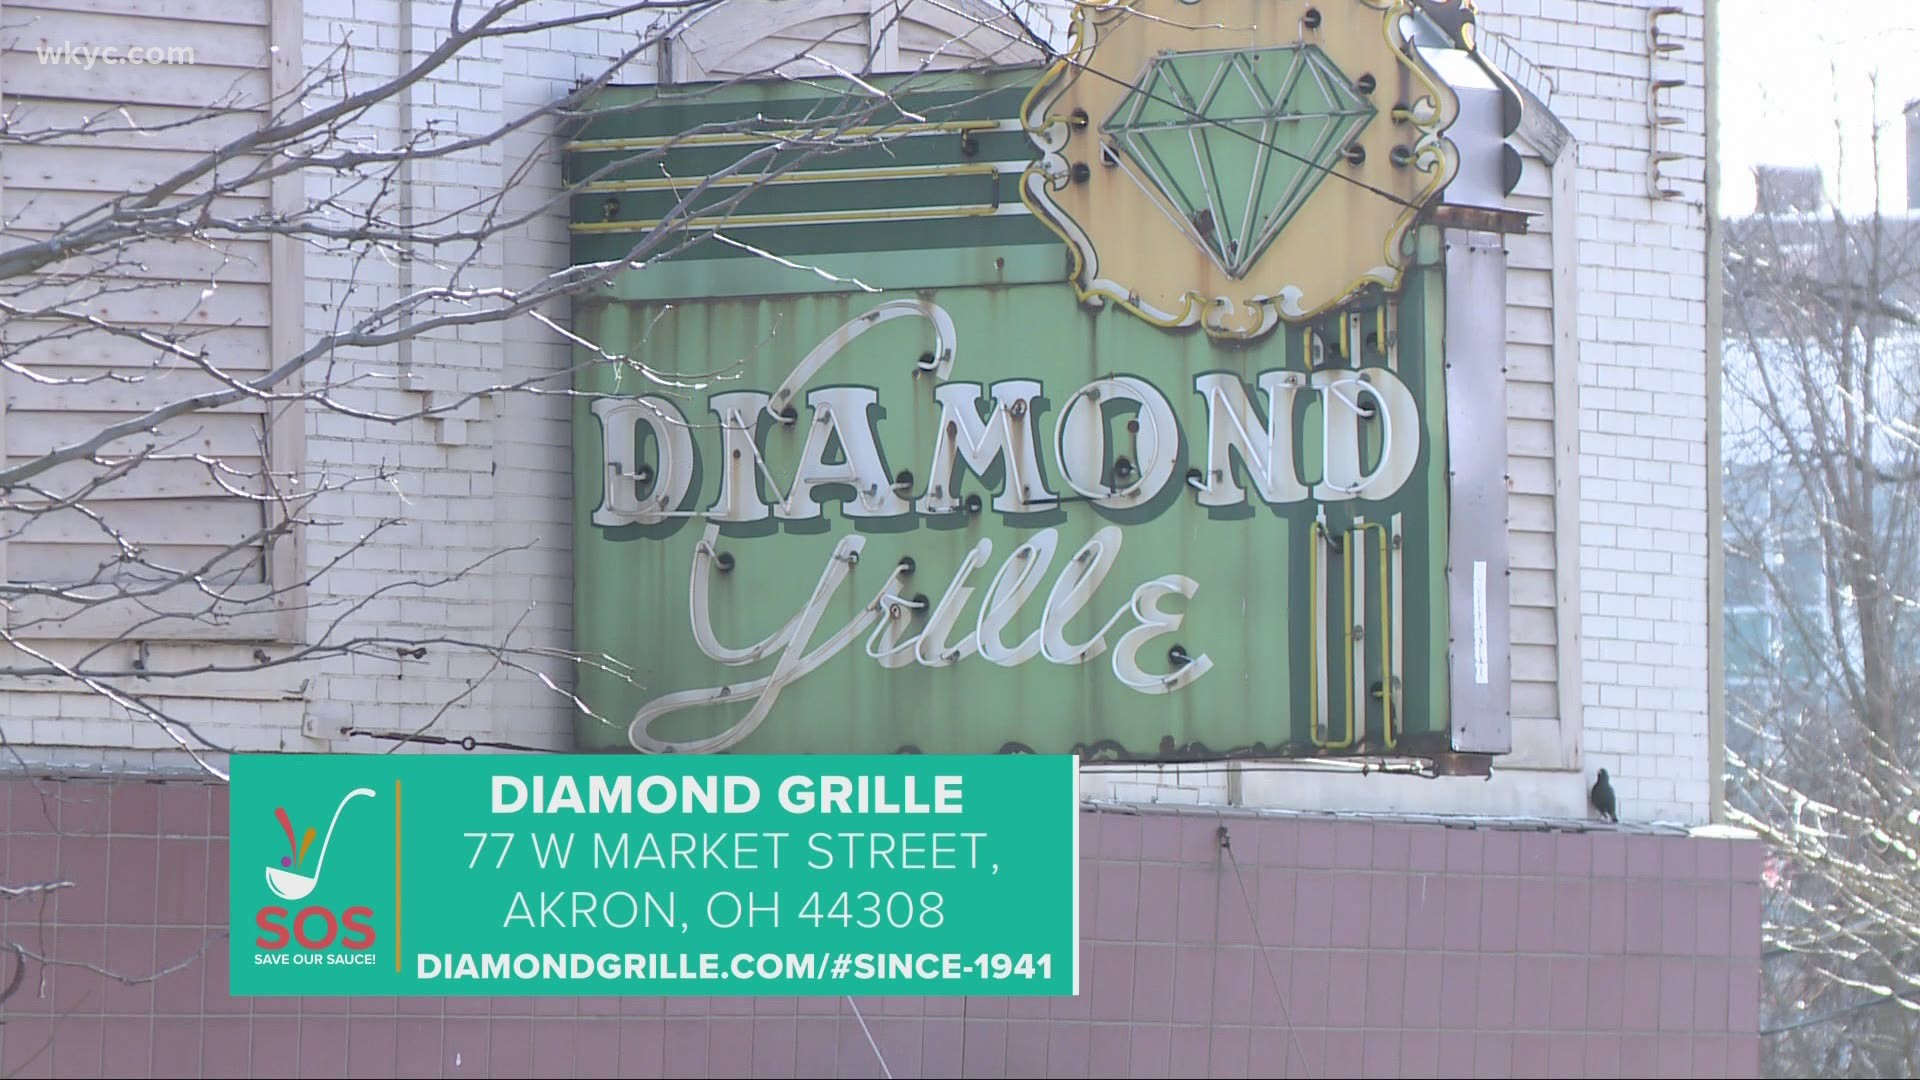 We're highlighting the Diamond Grille in Akron as we continue the 'Save Our Sauce' campaign in support of Northeast Ohio restaurants amid the COVID-19 pandemic.